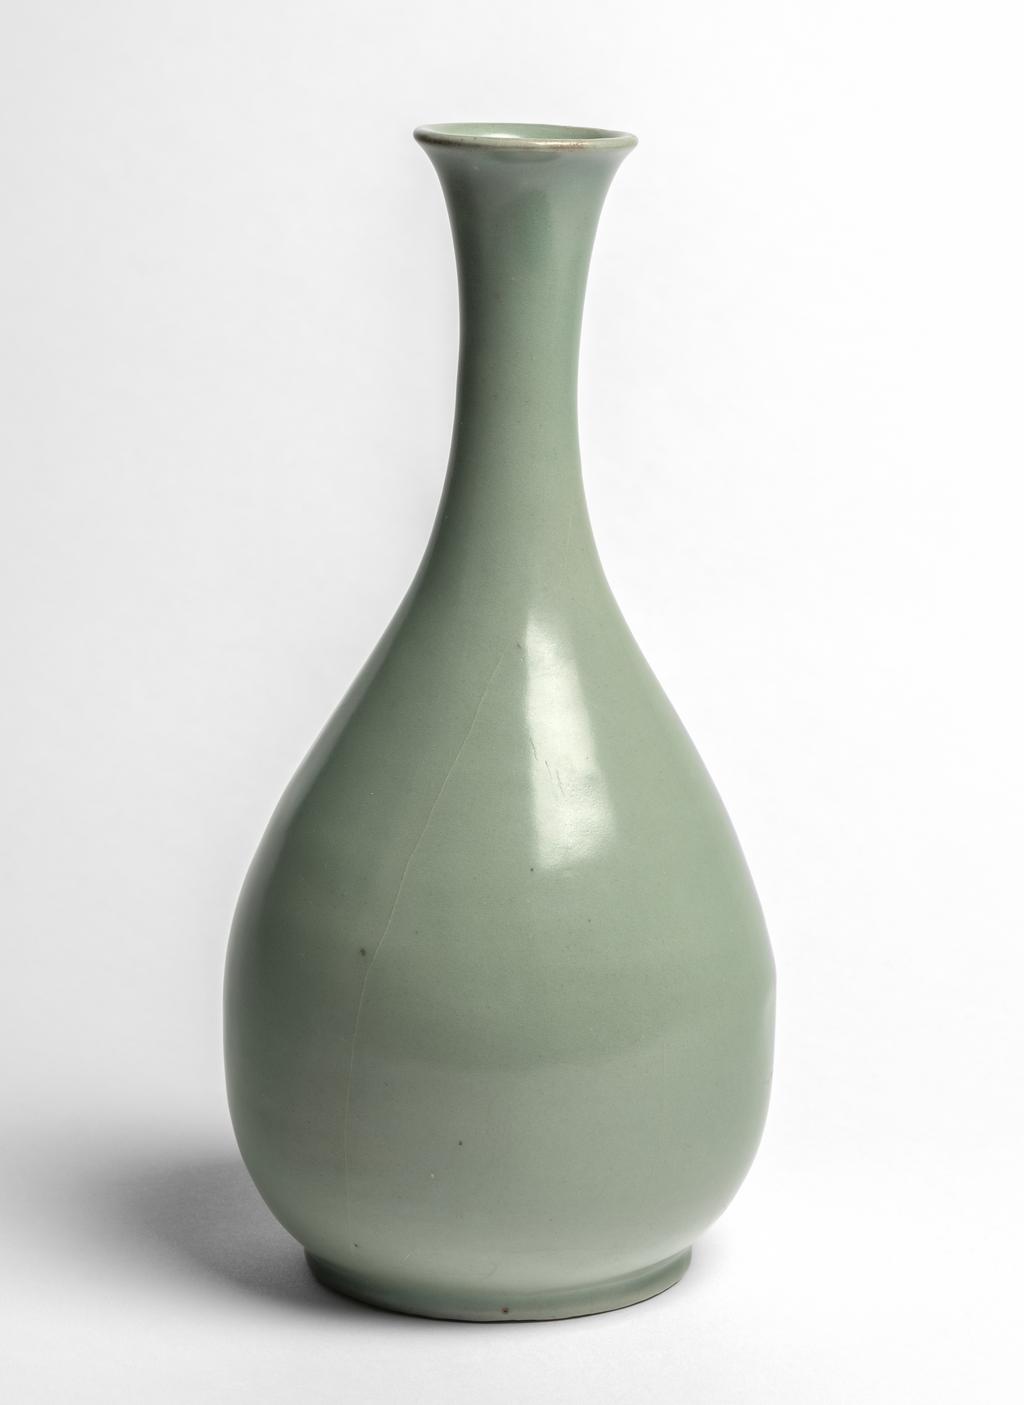 An image of Wine bottle. Unknown pottery, Korea, South Cholla province, Kangjin-gun, Sadang-ri kilns. This bottle has an elegant outline, with a long neck that flares towards the mouth, and a pear-shaped body. It is completely plain. The foot is wide but very low. The body is of fine clay; the clear semi-transparent glaze is evenly applied all over the body and subtly shimmers in a fine jade colour. The foot is completely glazed, and the base shows five quartzite spur-marks. Stoneware, thrown and celadon-glazed. Height, bottle, 29.6 cm, diameter, rim, 5.4 cm, diameter, foot, 9.8 cm, circa 1100-1150. Koryo Dynasty.